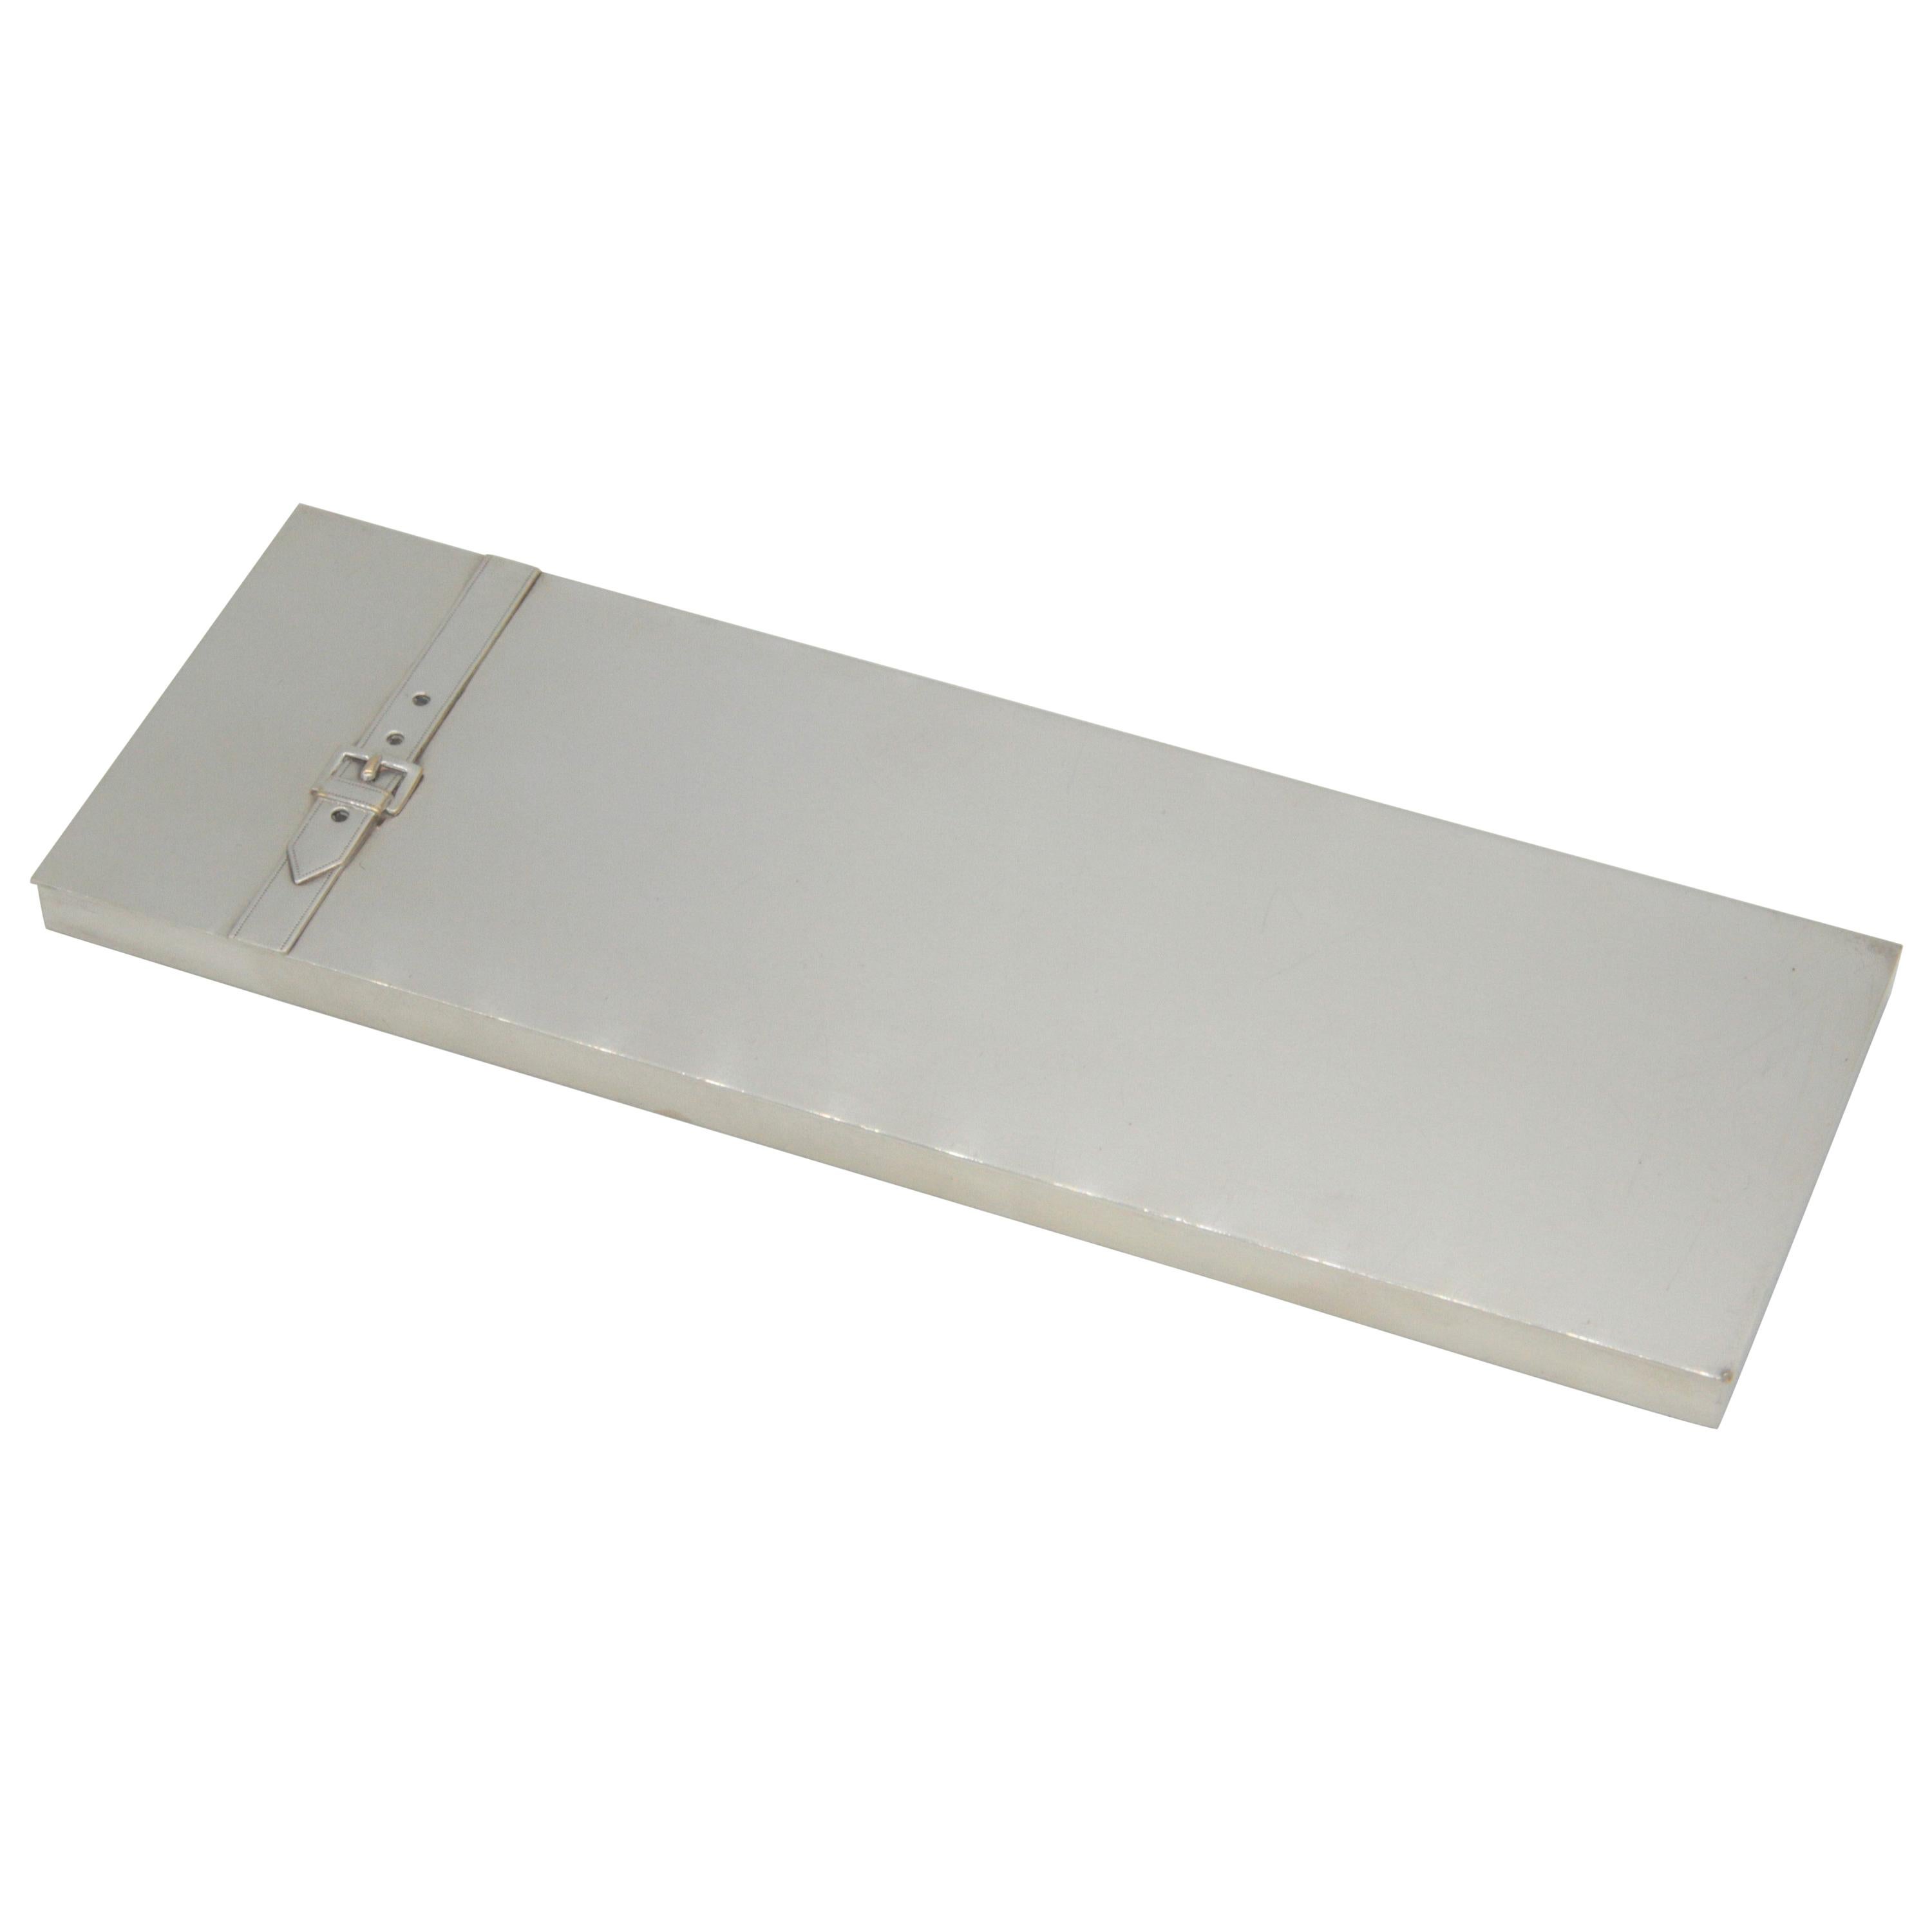 Silvered-Metal Cigarette Box by Maria Perguay, 1960s For Sale